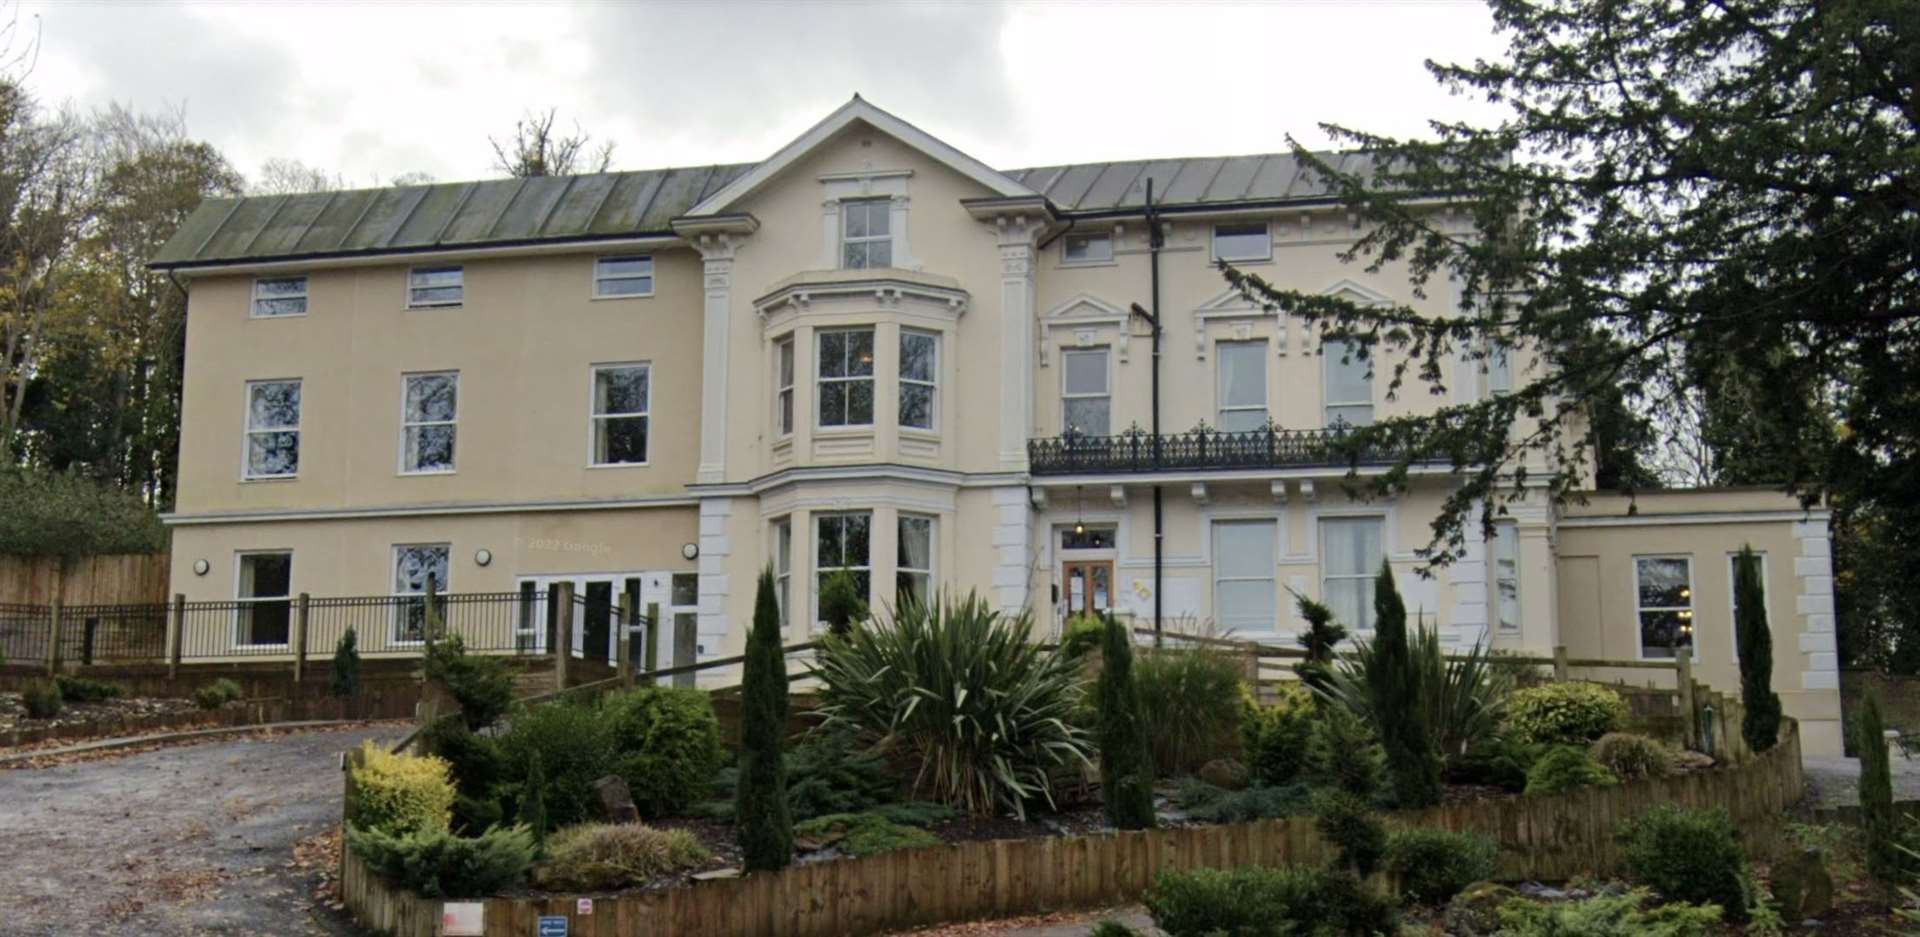 Woodside Care Home in Dover received a rating of "requires improvement" by watchdog CQC. Picture: Google